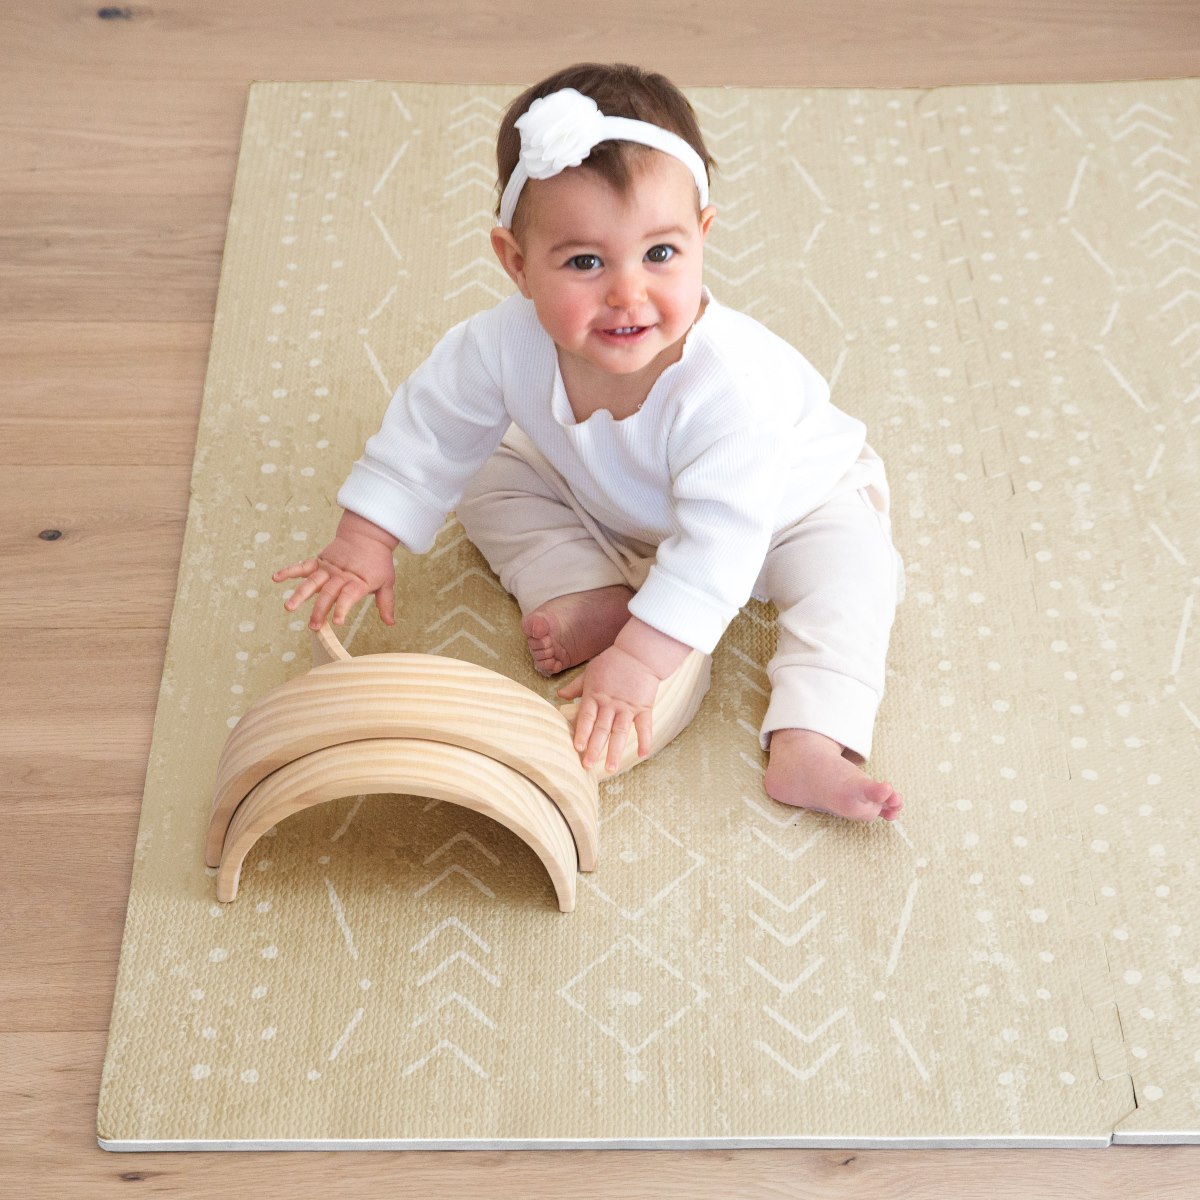 Interlocking Puzzle Tiles for Tummy Time and Crawling Thick Gray Non-Toxic Playmat Lillefolk Stylish Foam Play Mat for Baby Covers 6 ft x 4 ft Soft